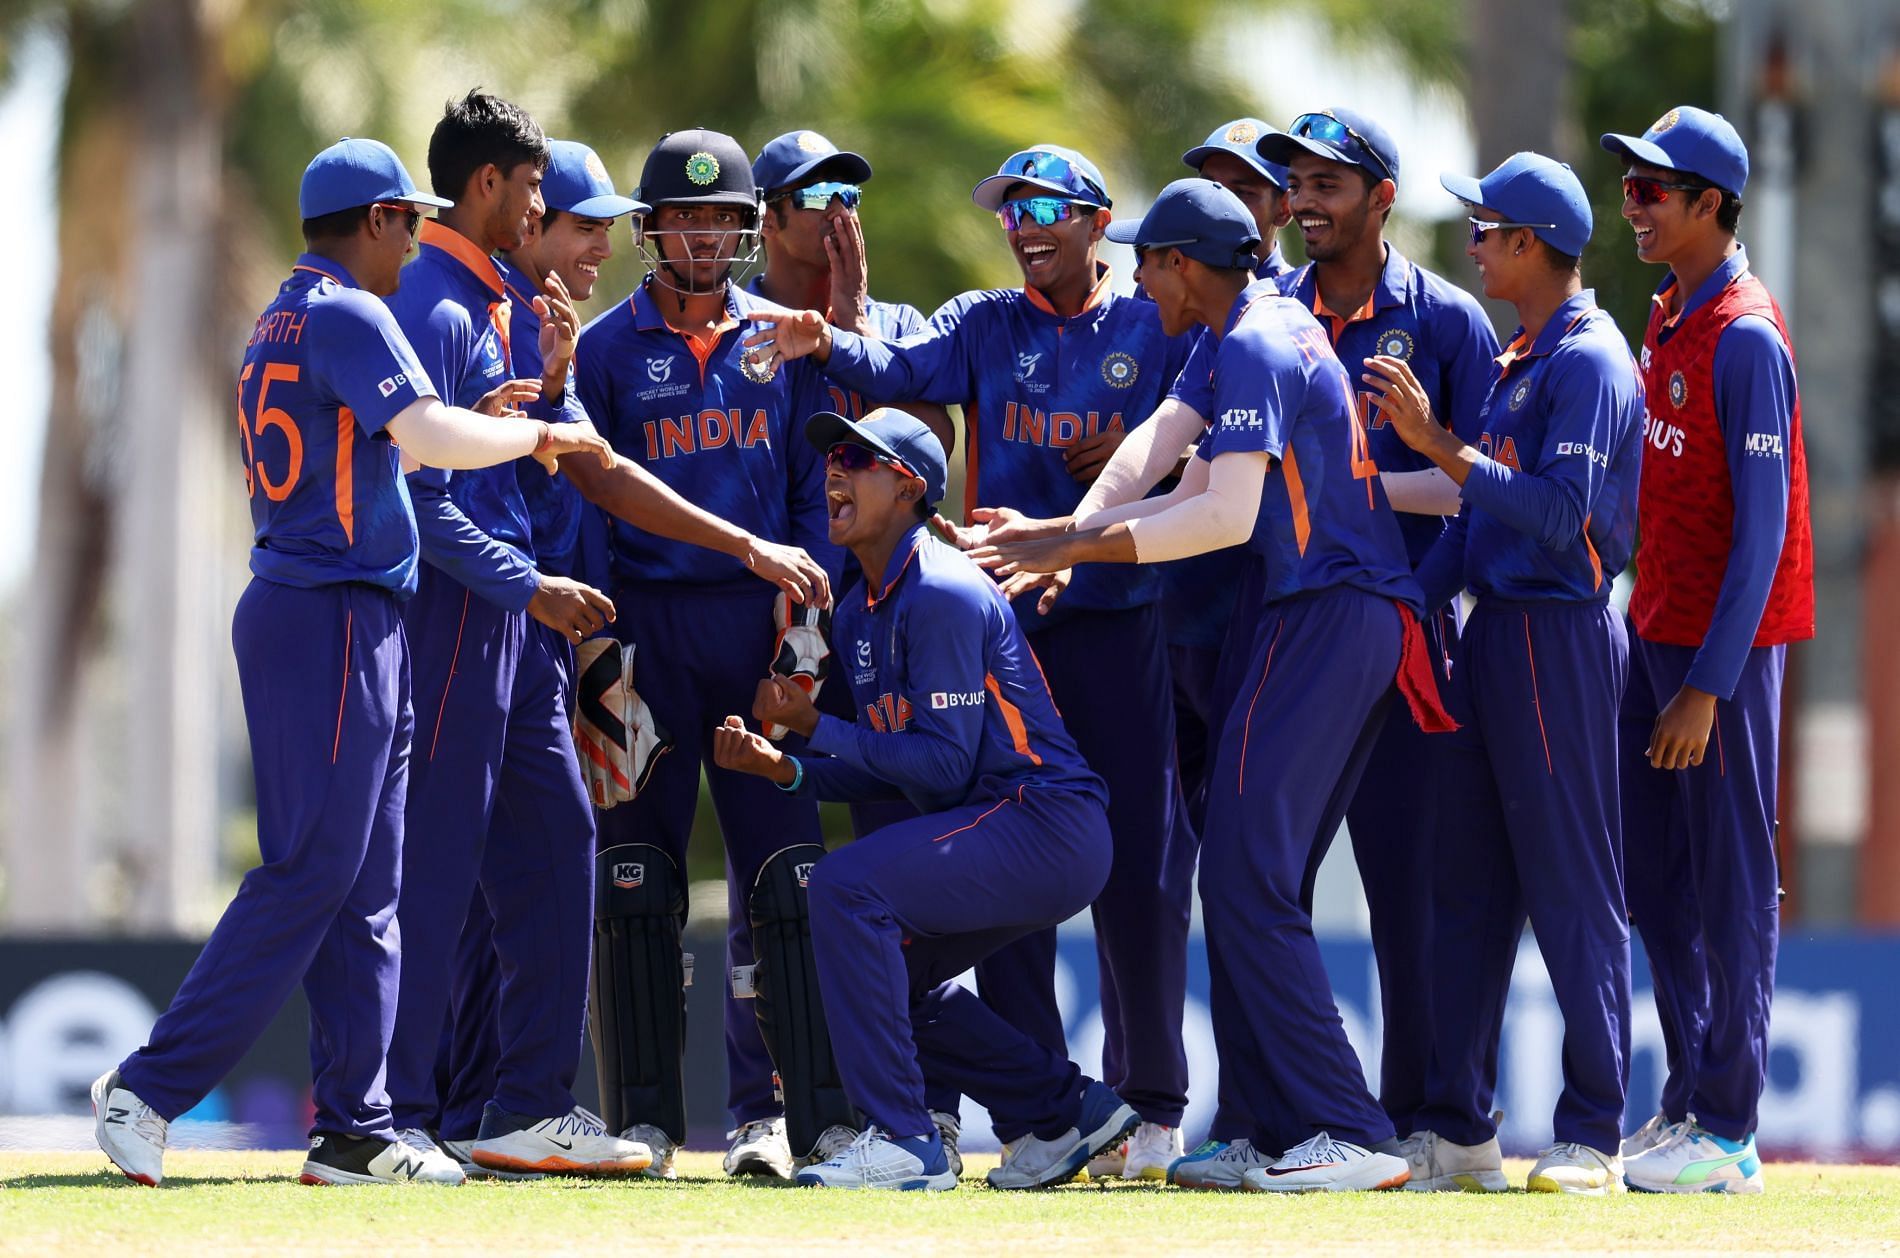 An ecstatic Indian team celebrates a wicket against Bangladesh. Pic: BCCI